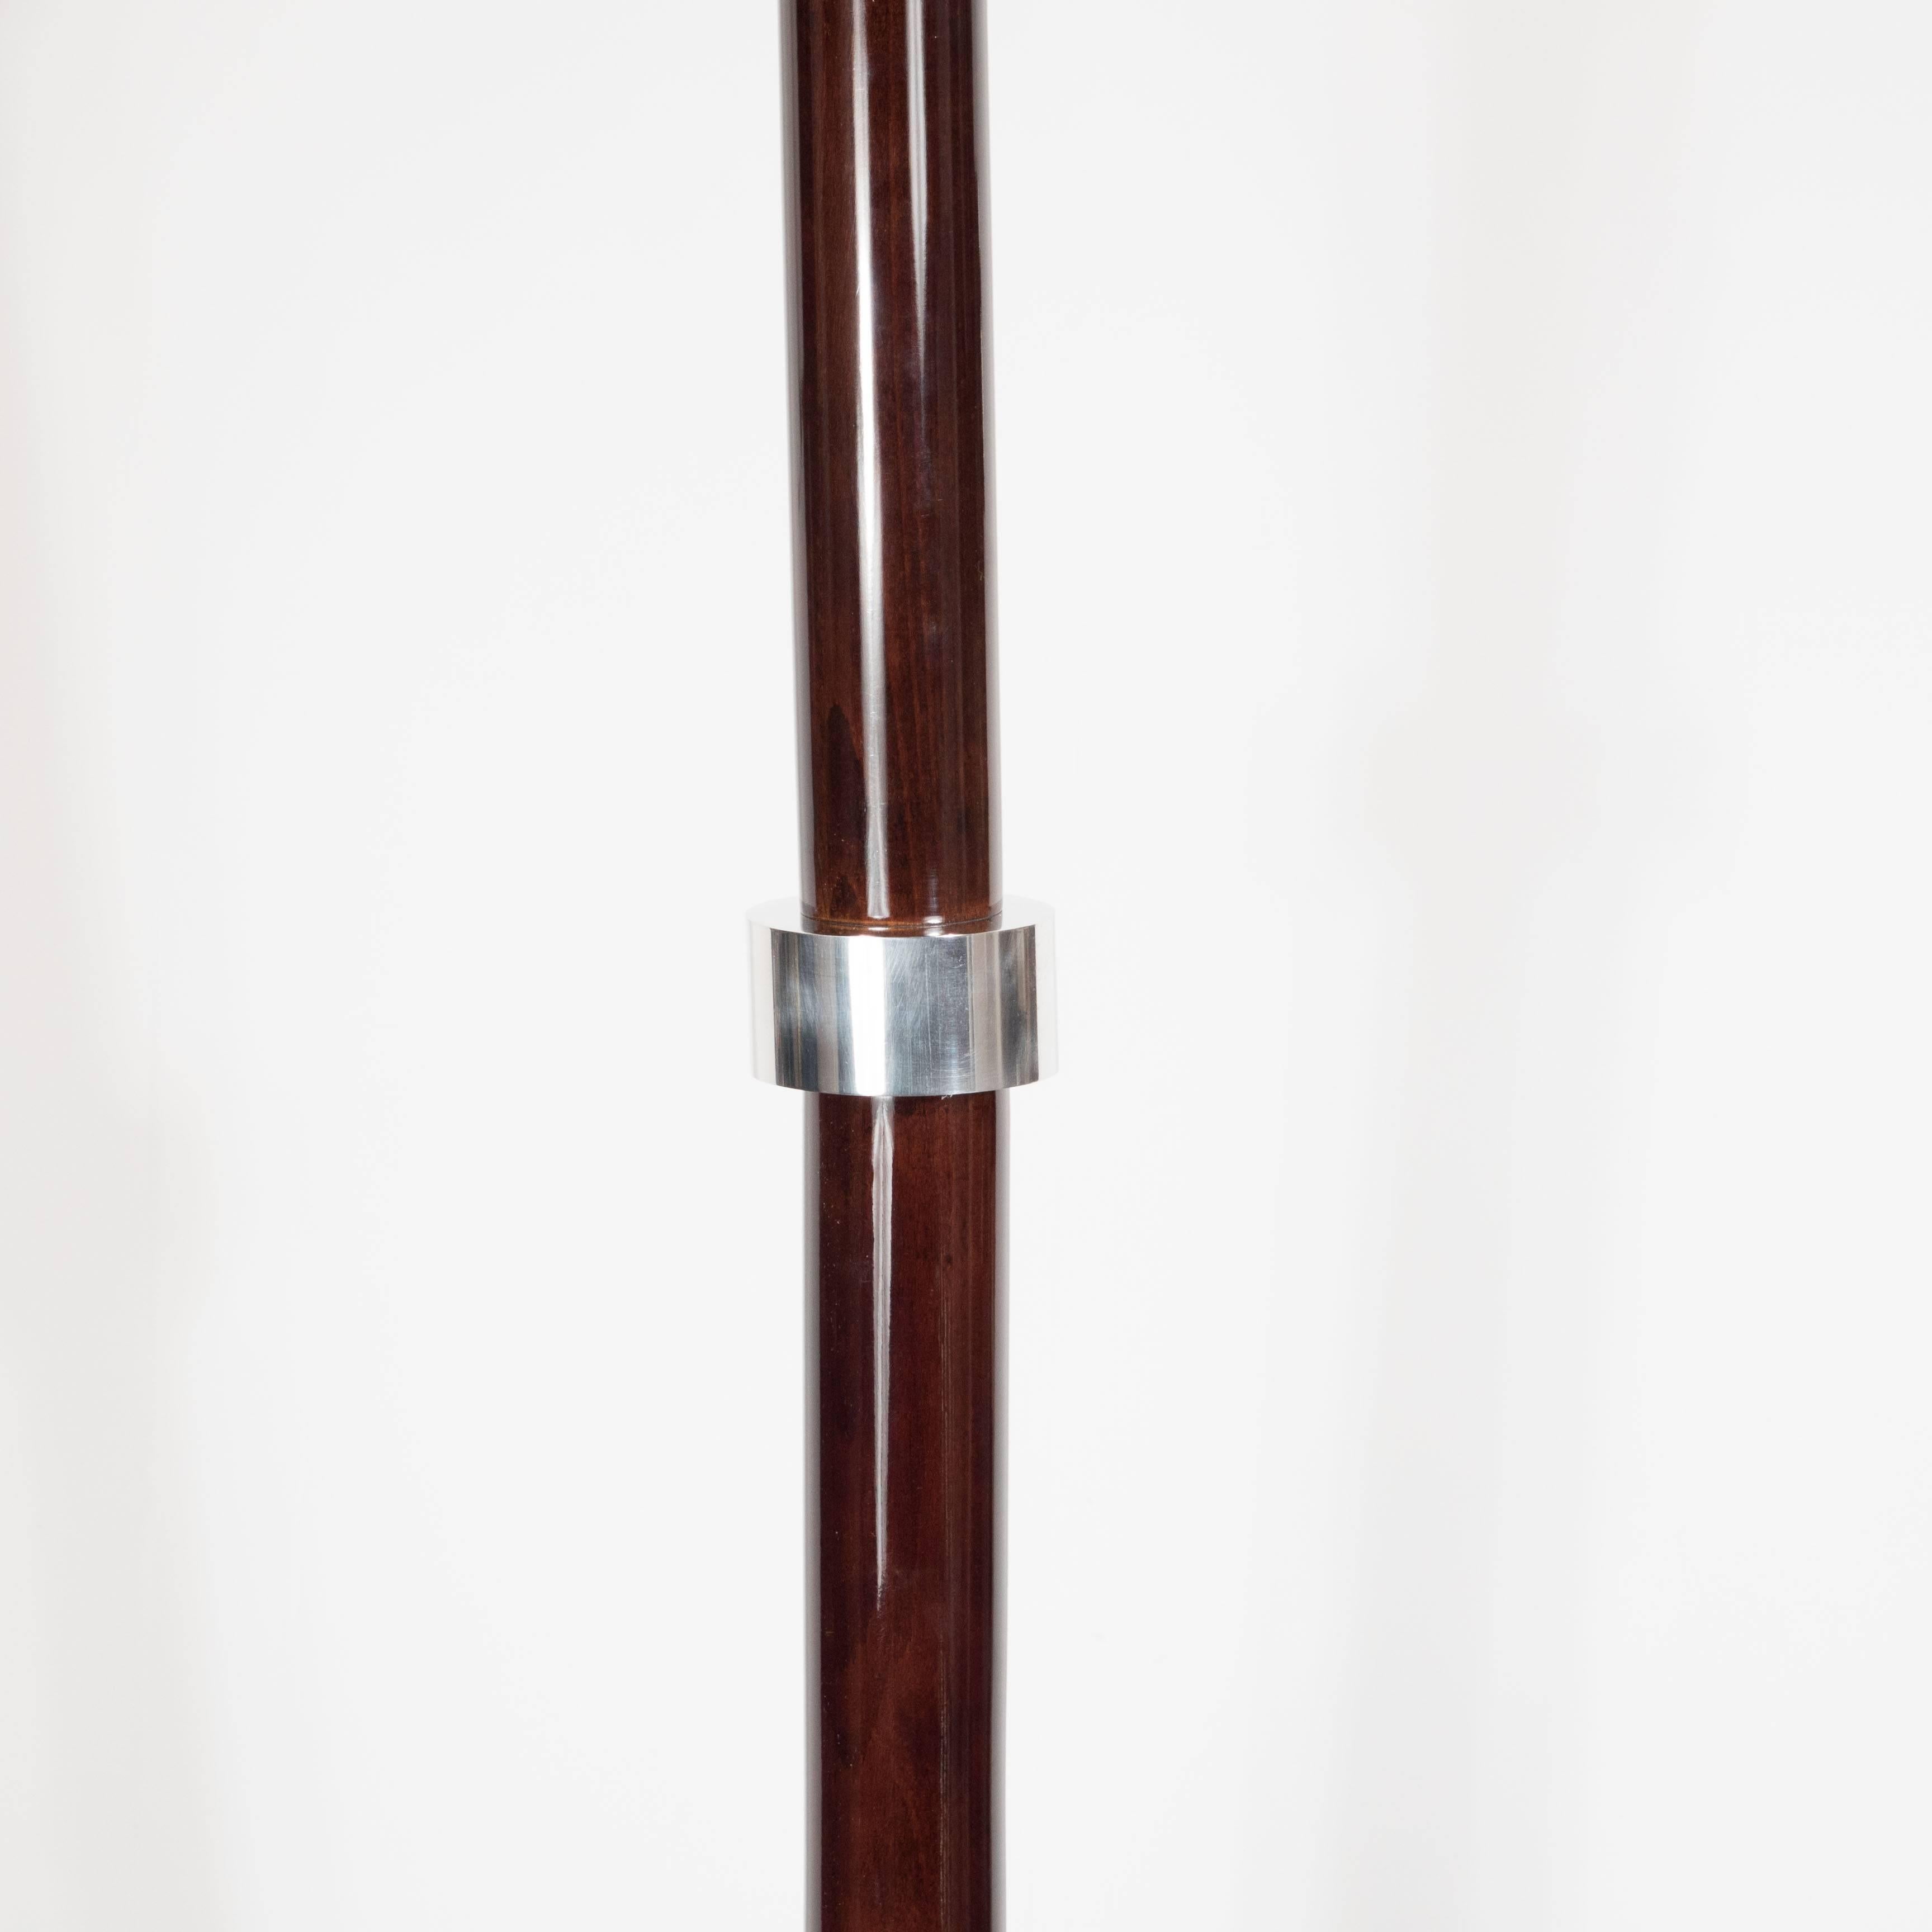 Created in France circa 1935, this luxe skyscraper style Art Deco torchiere lamp has been beautifully crafted in mahogany and polished chrome. It features a circular base, and a conical mahogany stem in mahogany with ringed chrome accents. The